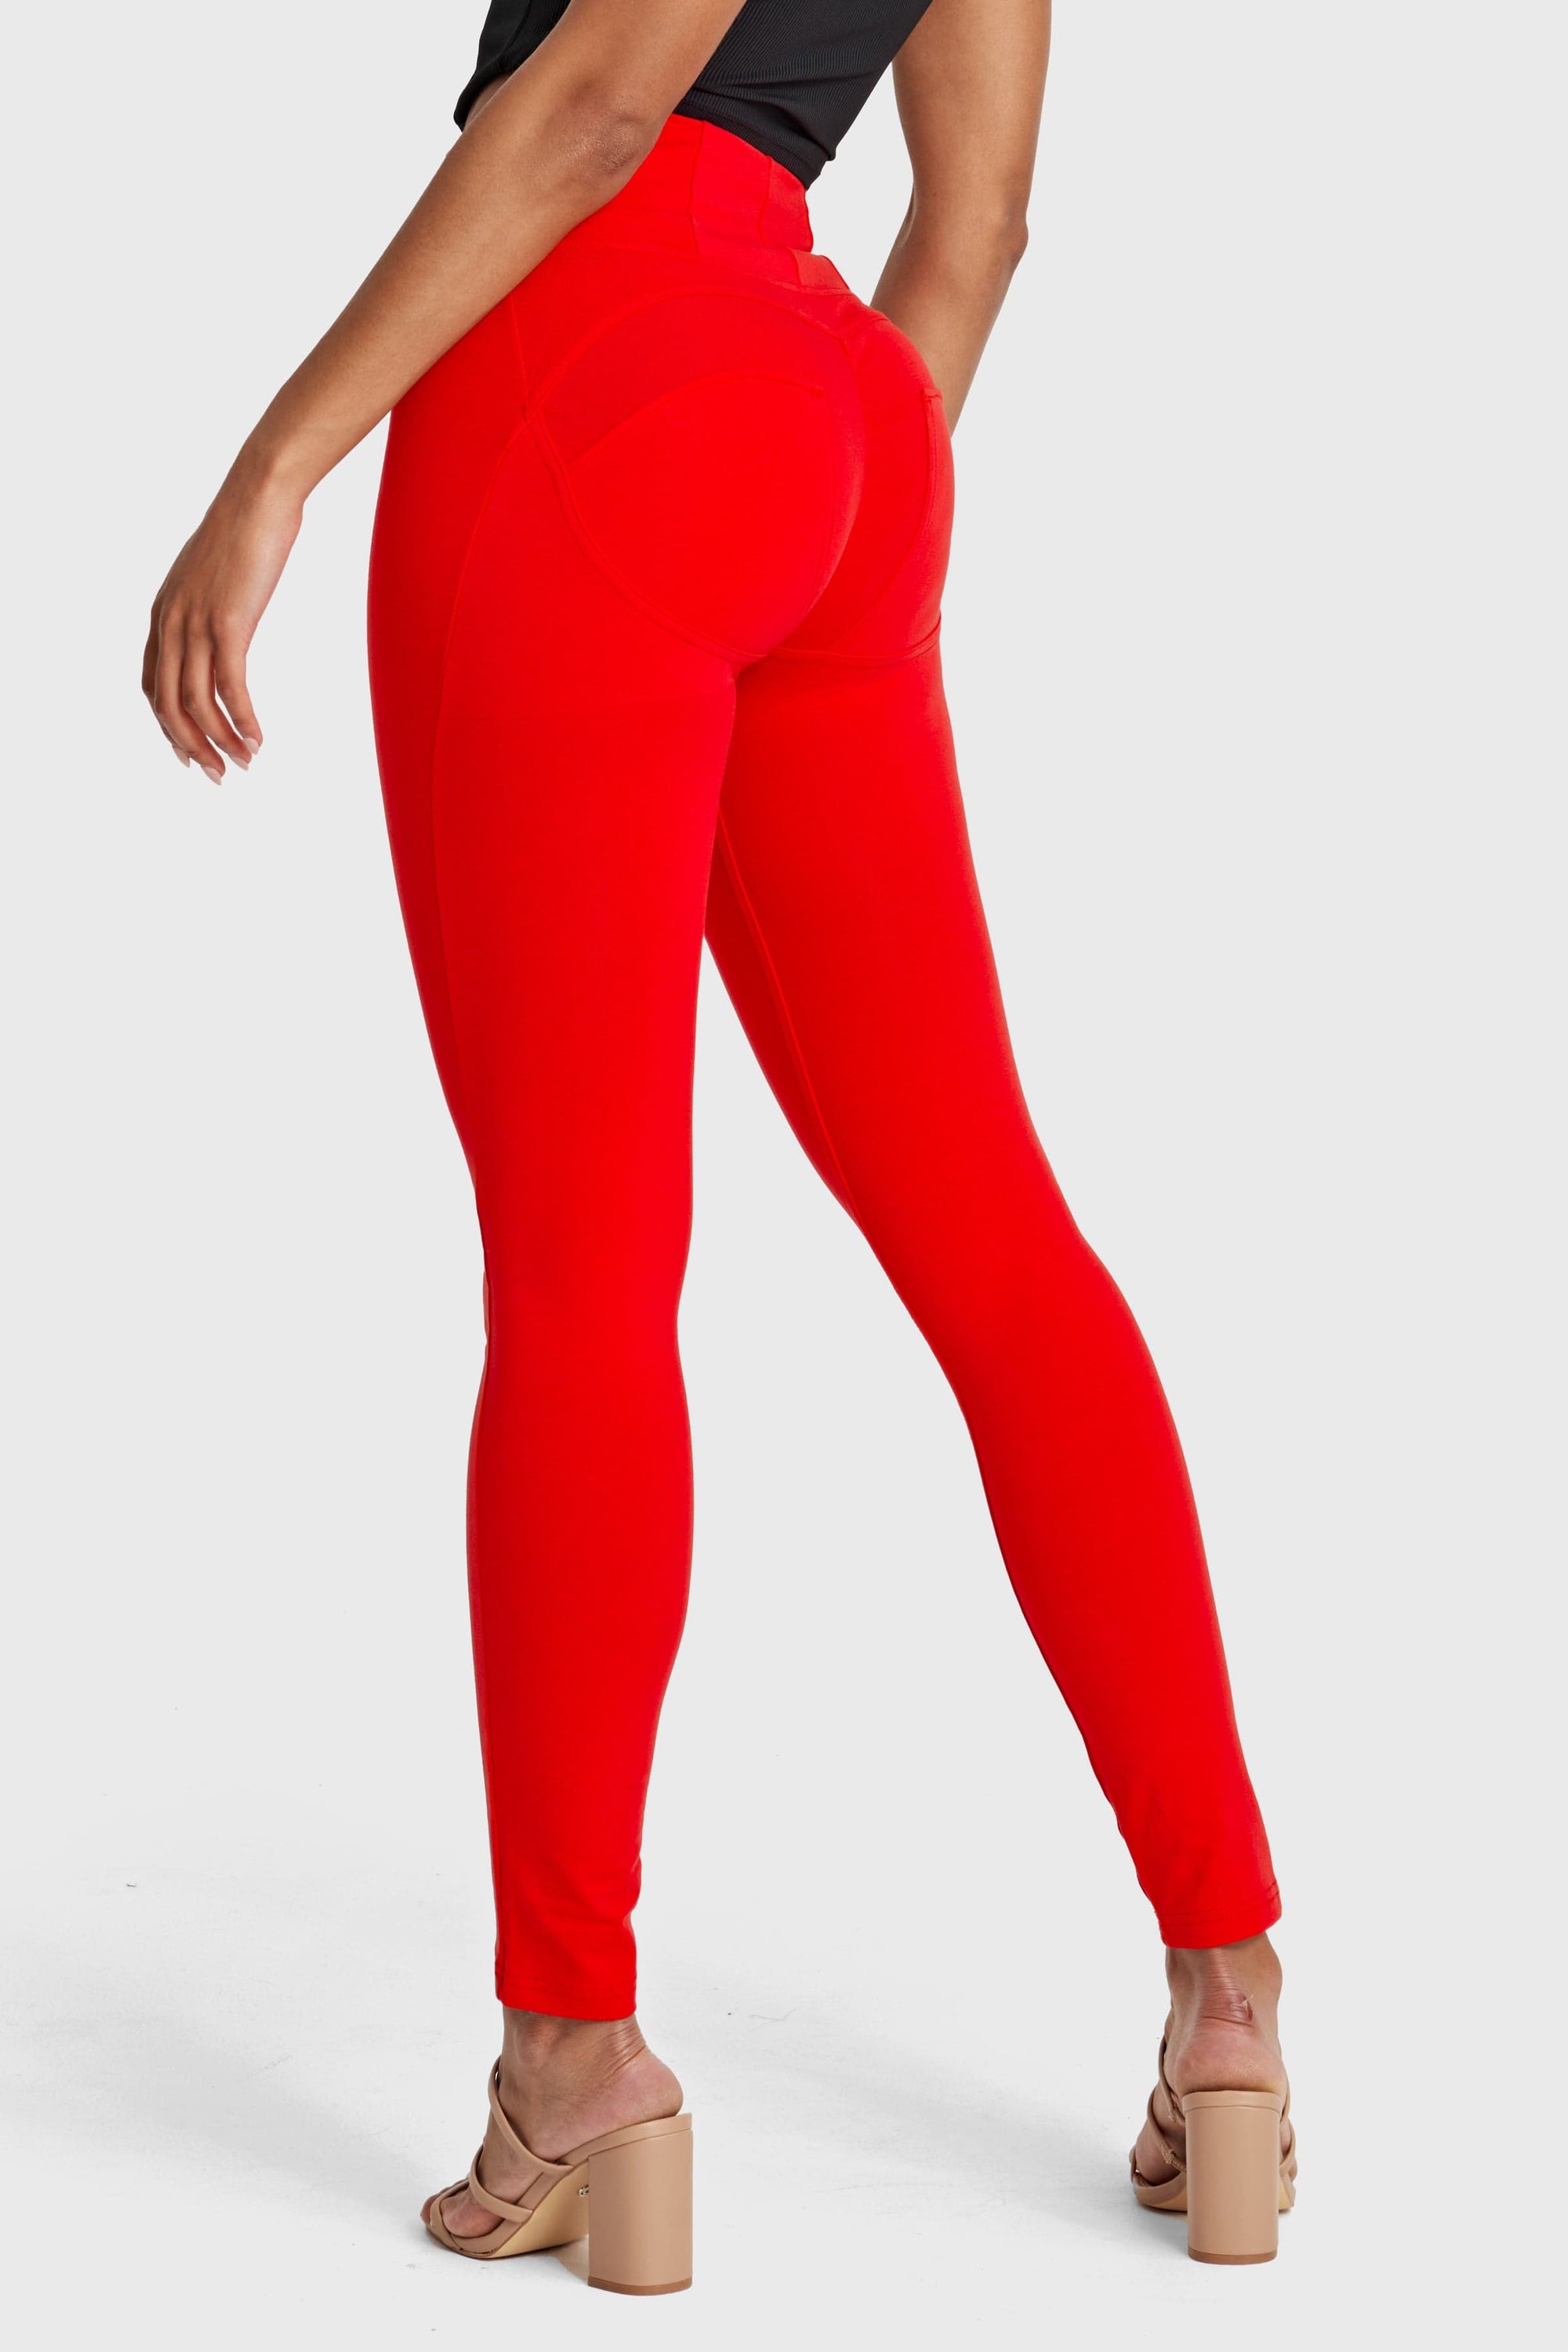 WR.UP® Fashion - High Waisted - Full Length - Red 9